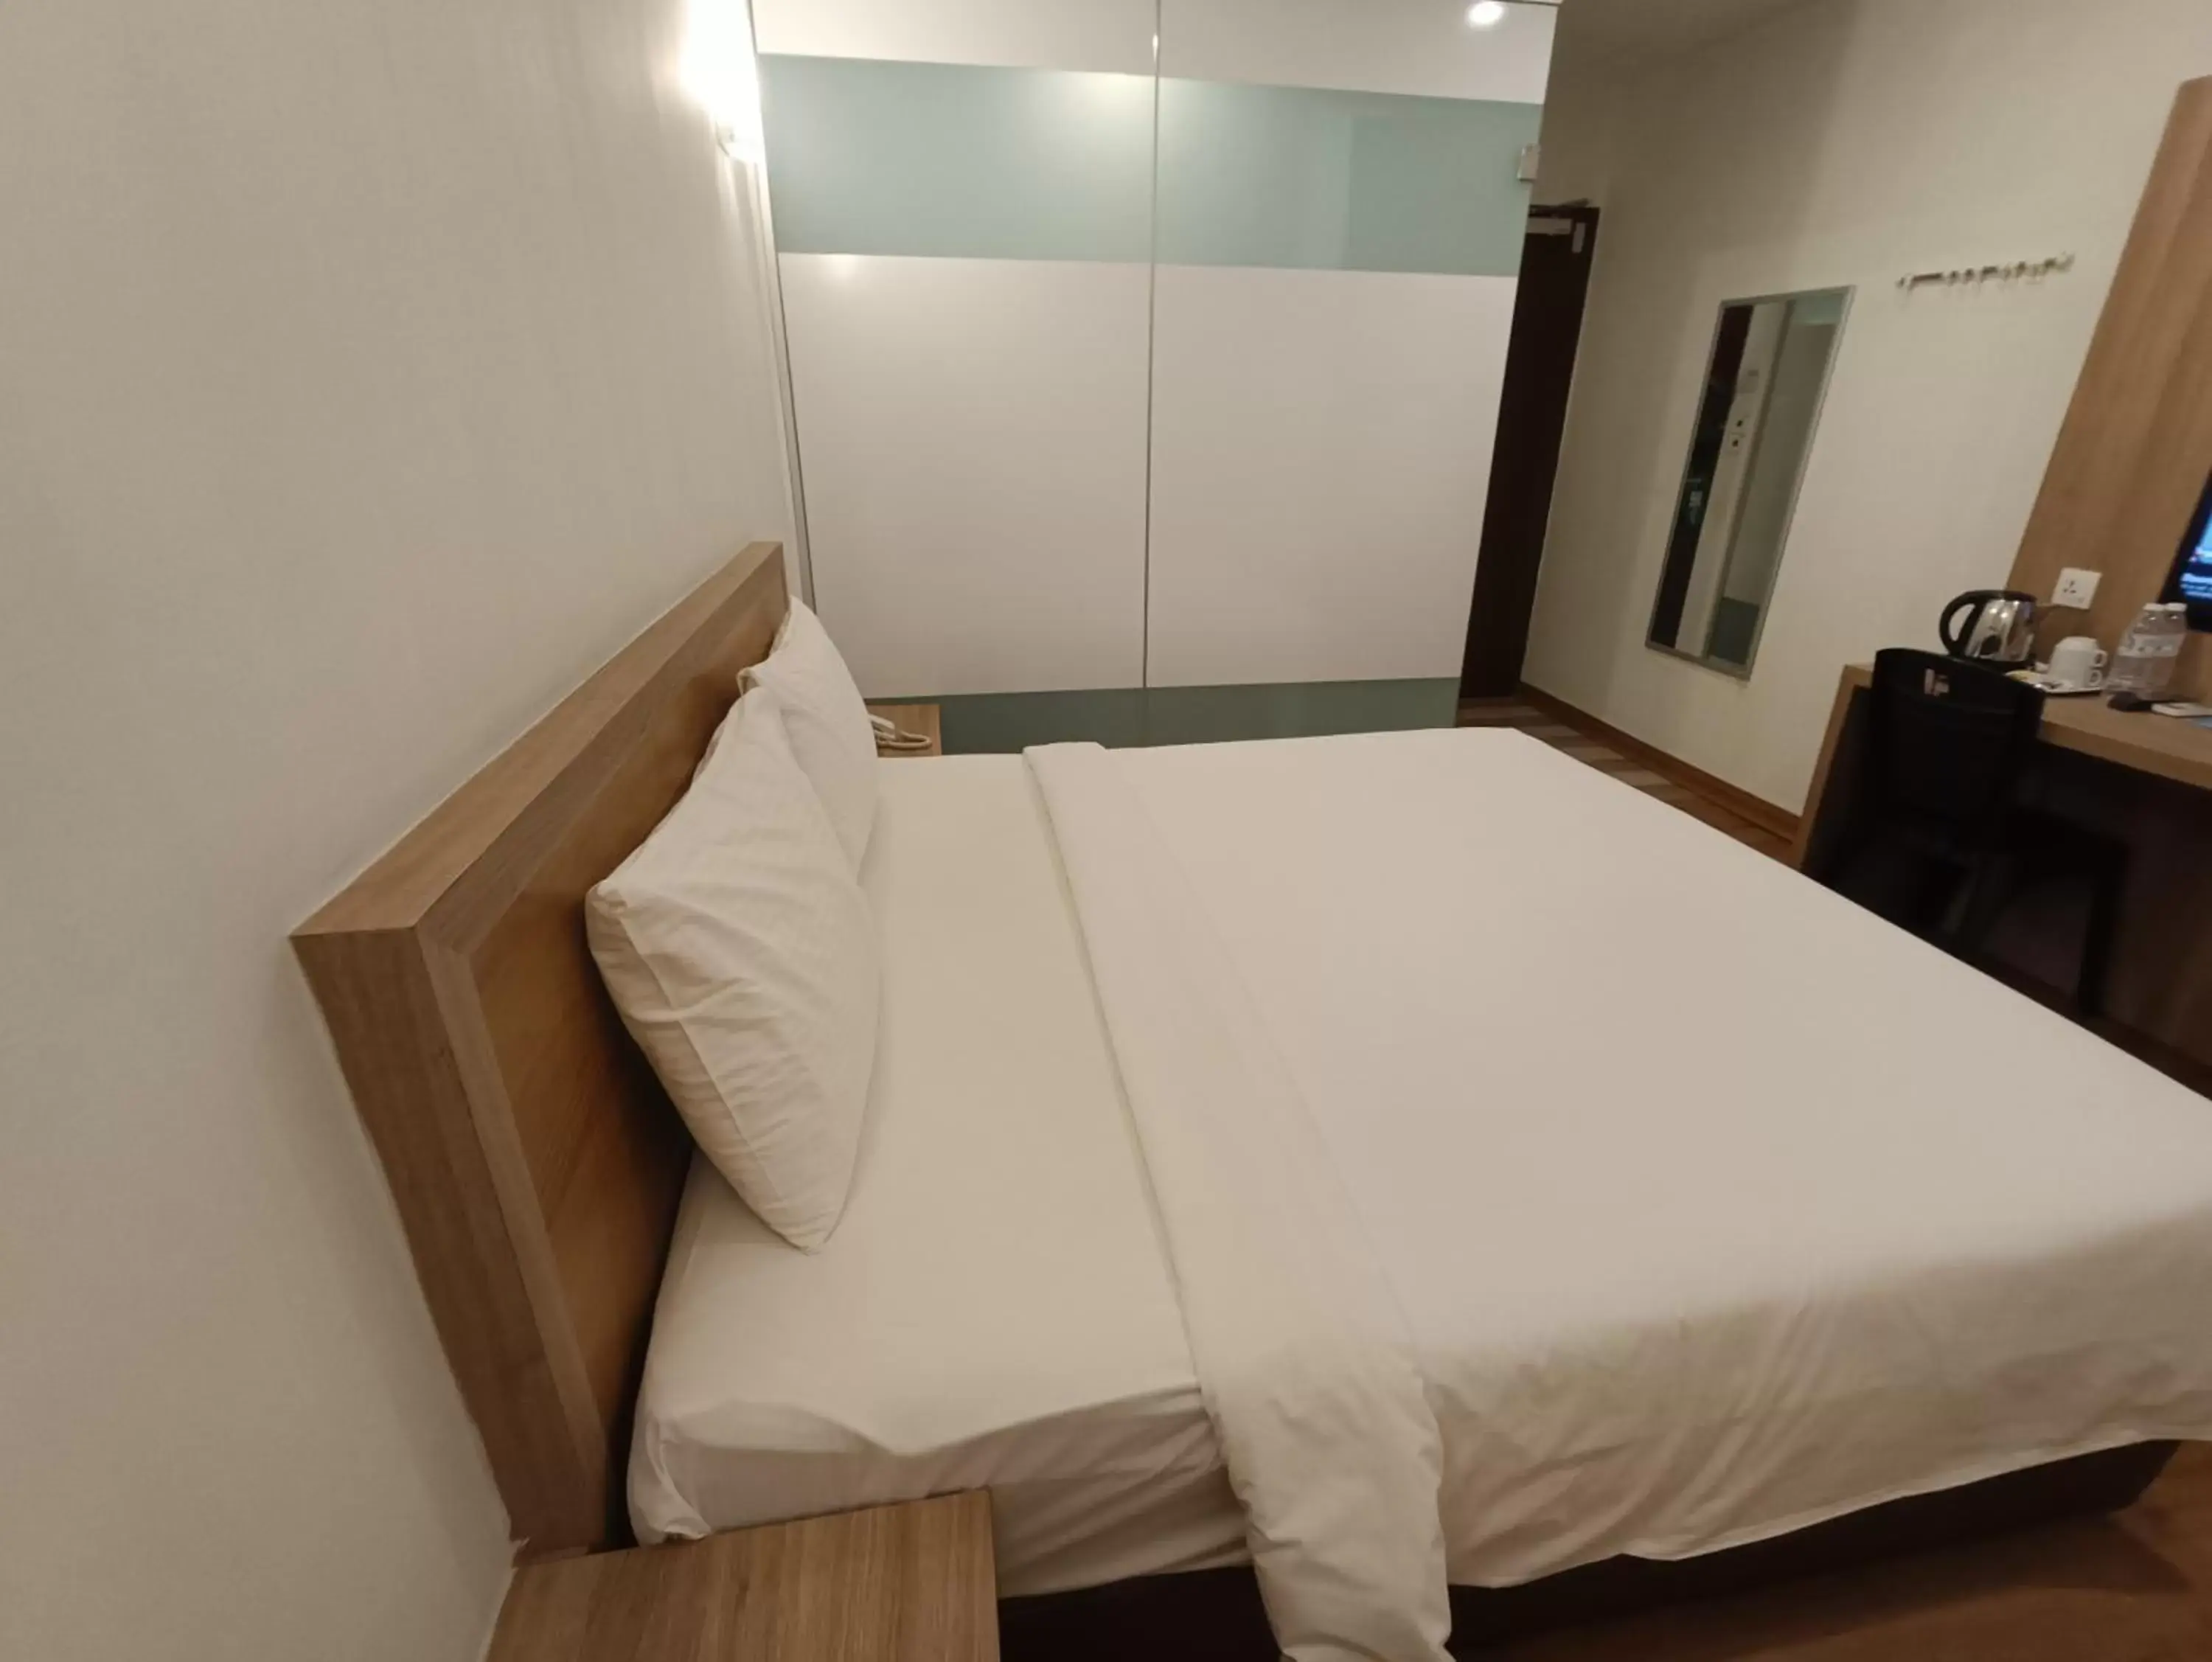 Bed in Greencity Hotel